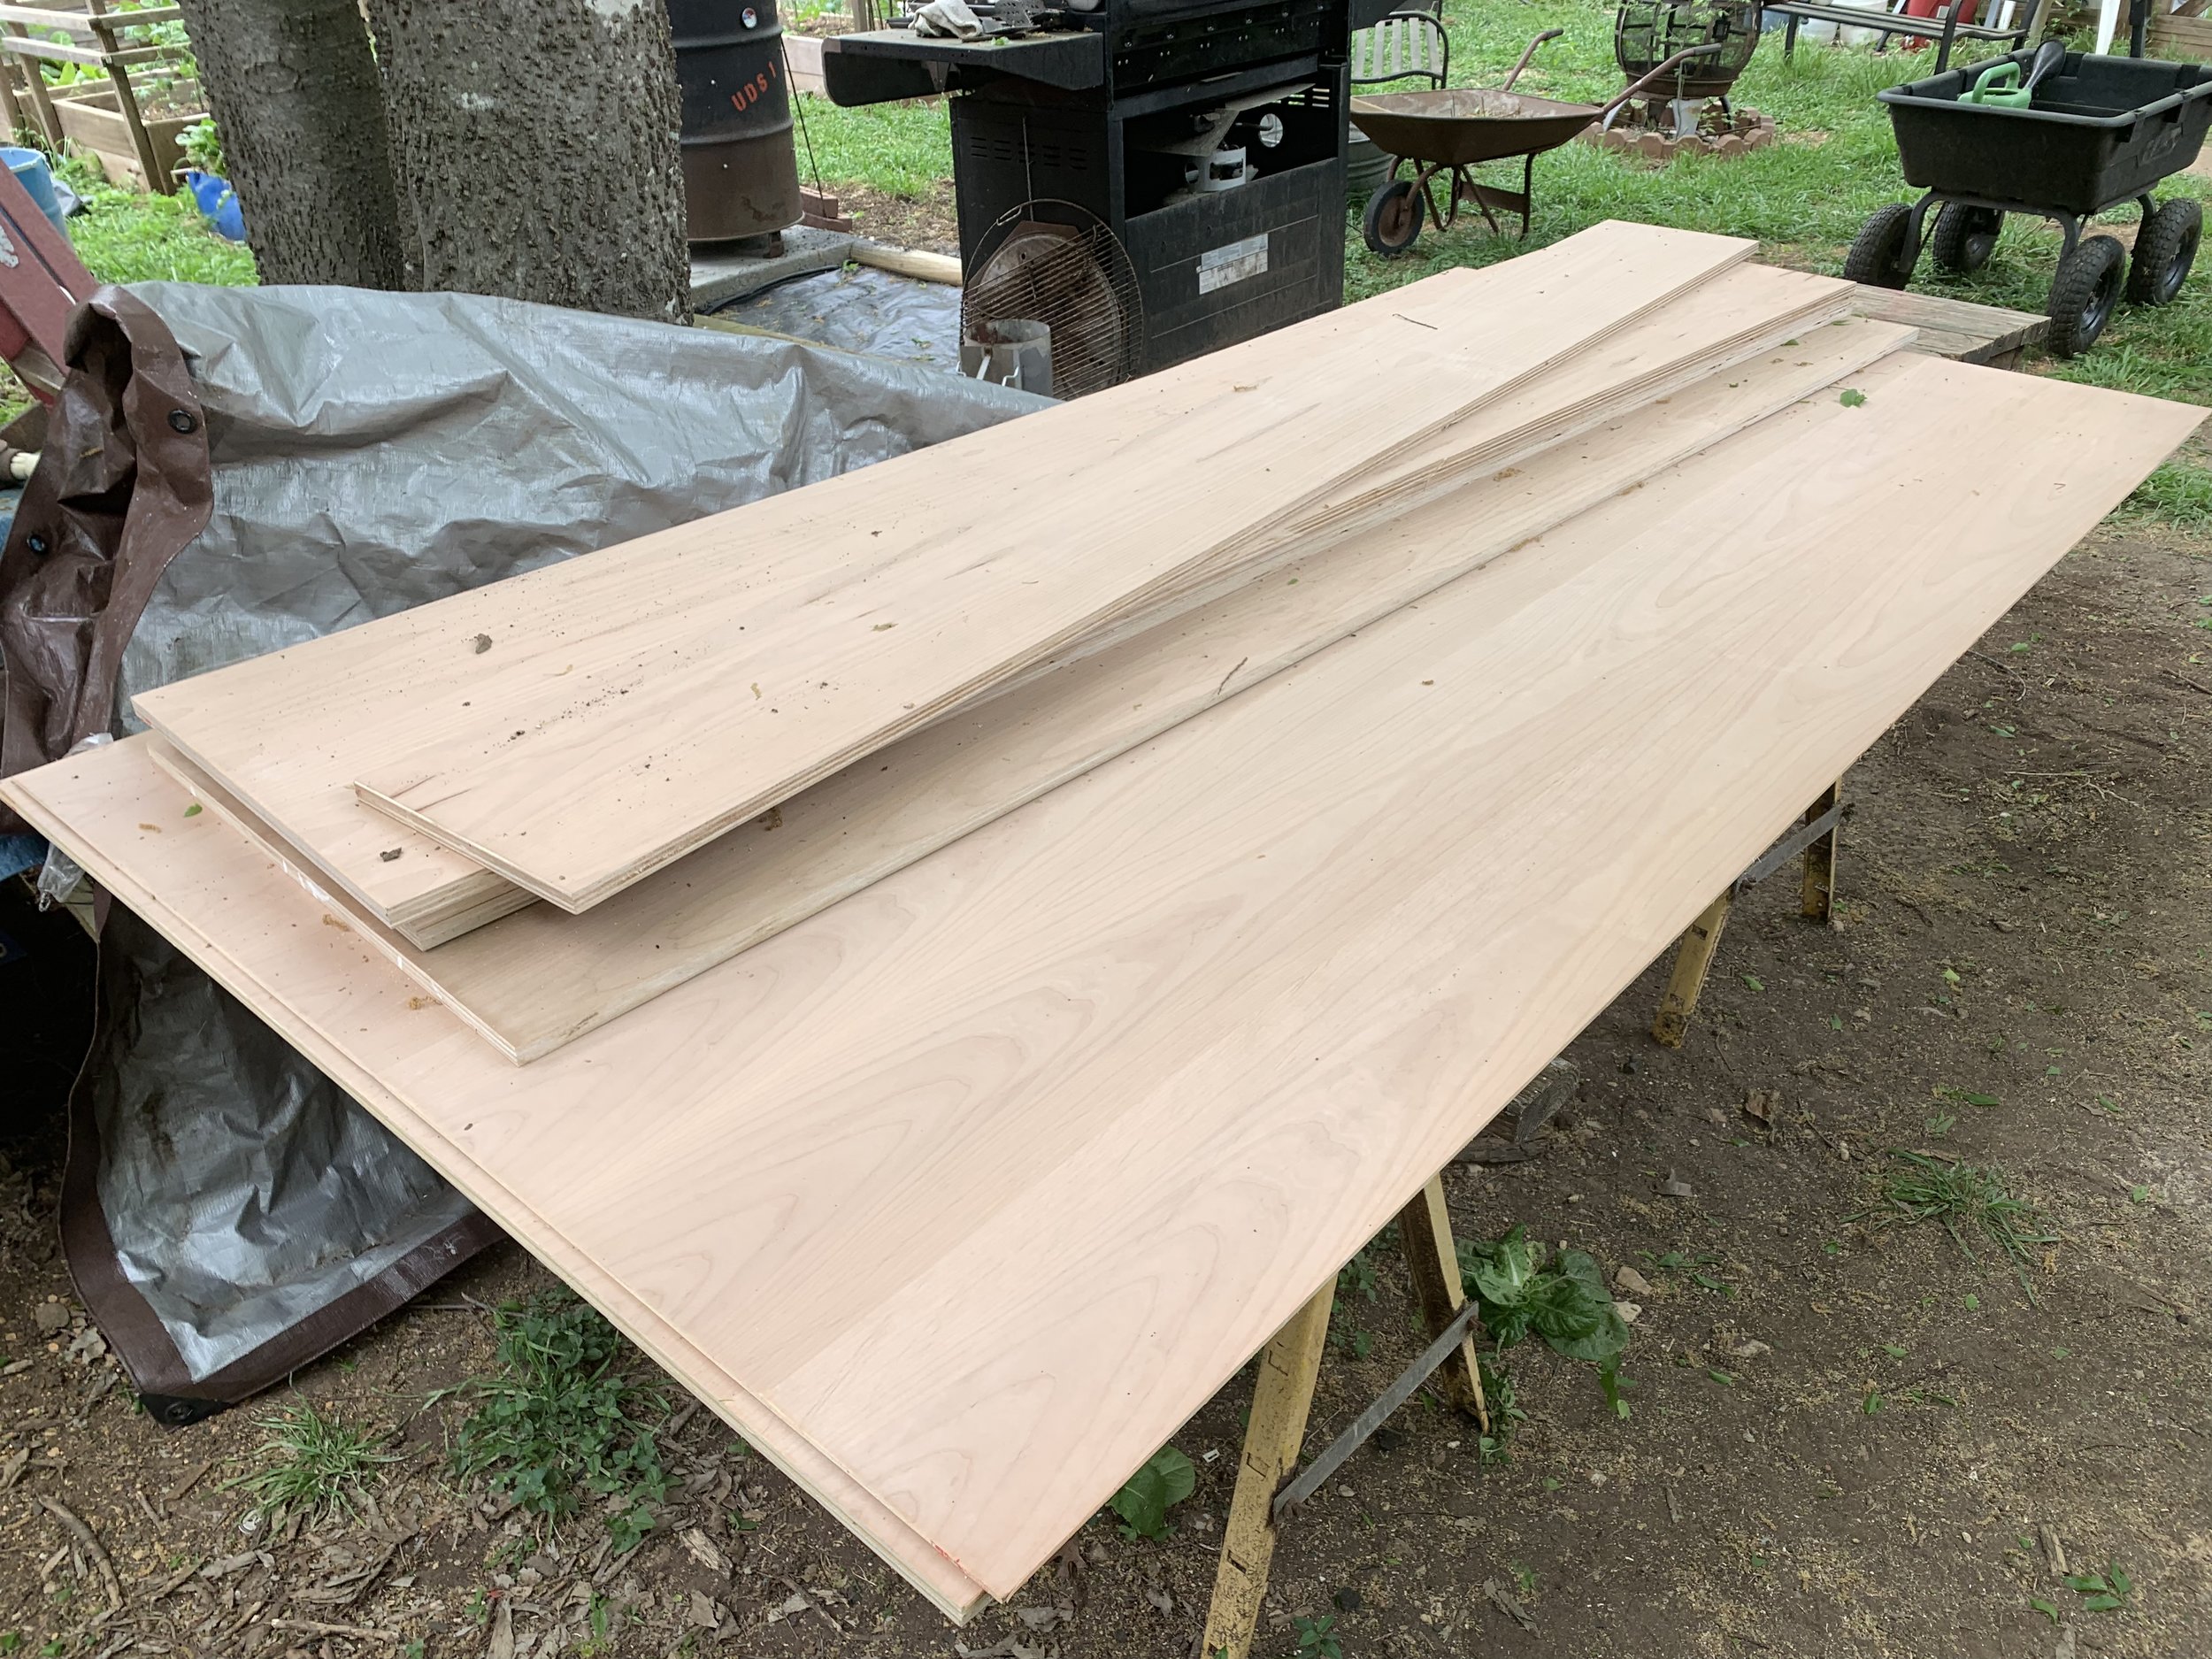  With our big cuts done, we ripped the pieces in half for the backs and sides. Unfortunately, we needed one extra sheet. Oh darn. I have to go back to Austin Fine Lumber… 